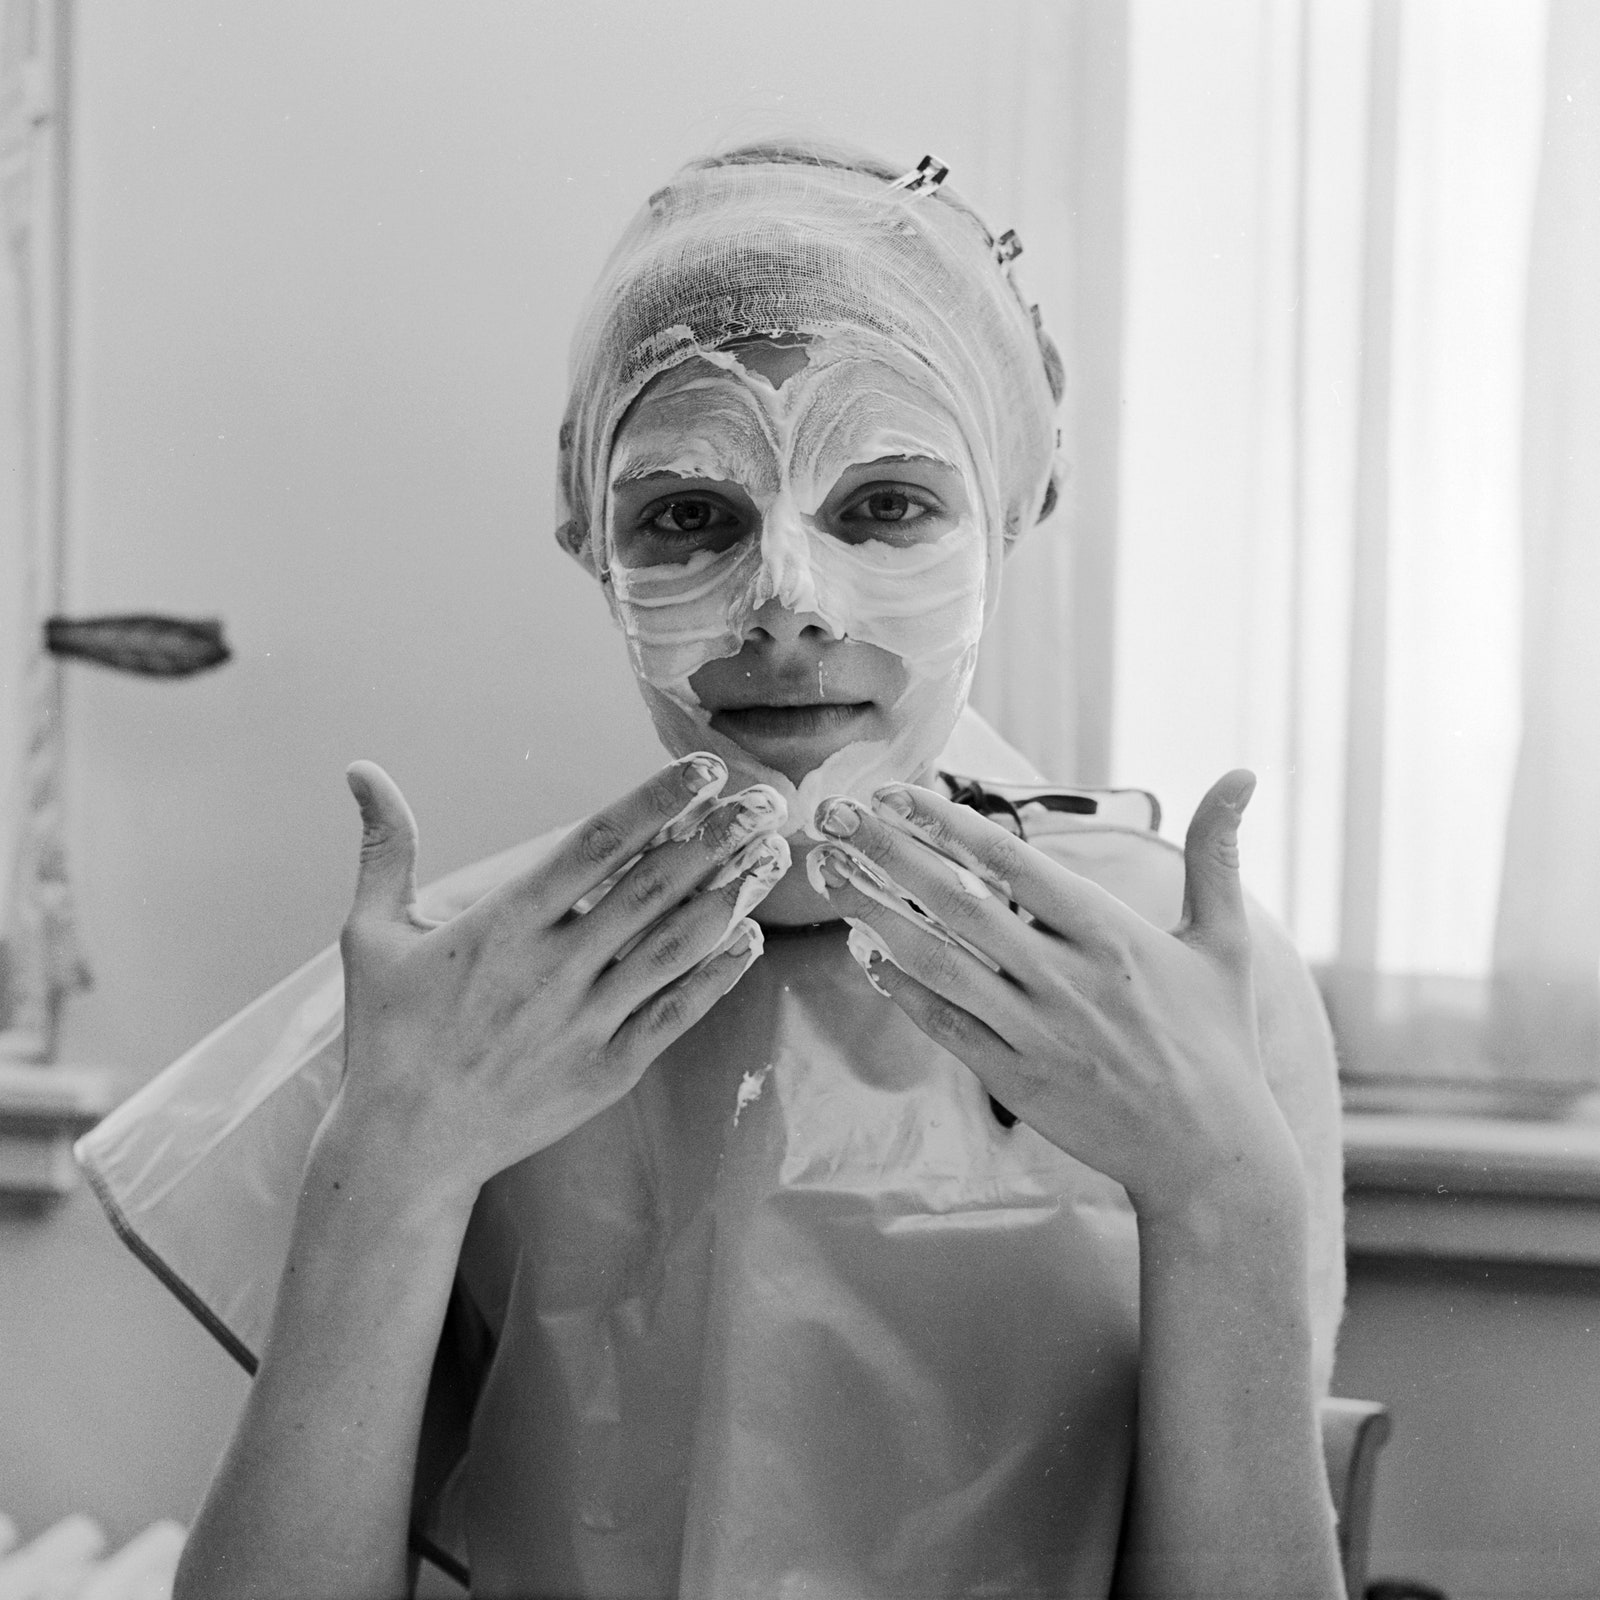 circa 1955  A woman gently applying skin cream to her face with the tips of her fingers.